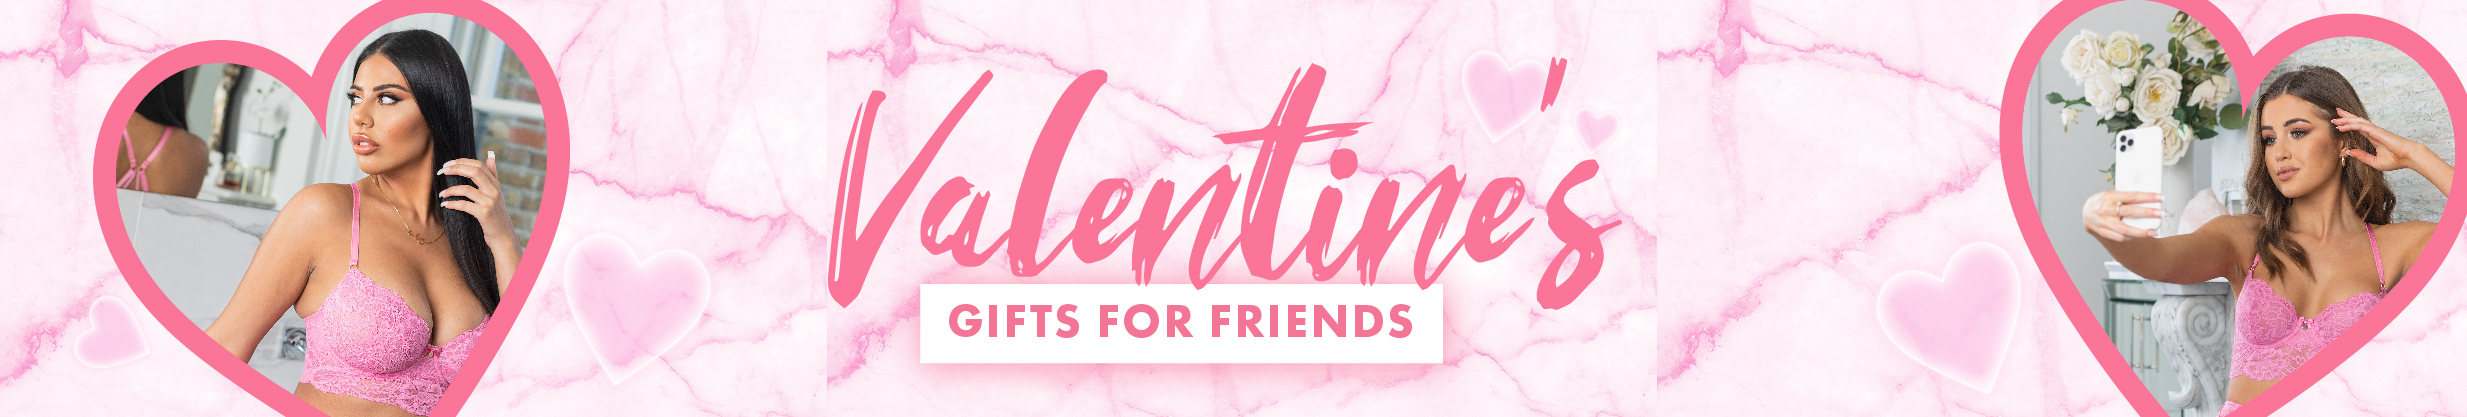 Valentine's Gifts For Friends